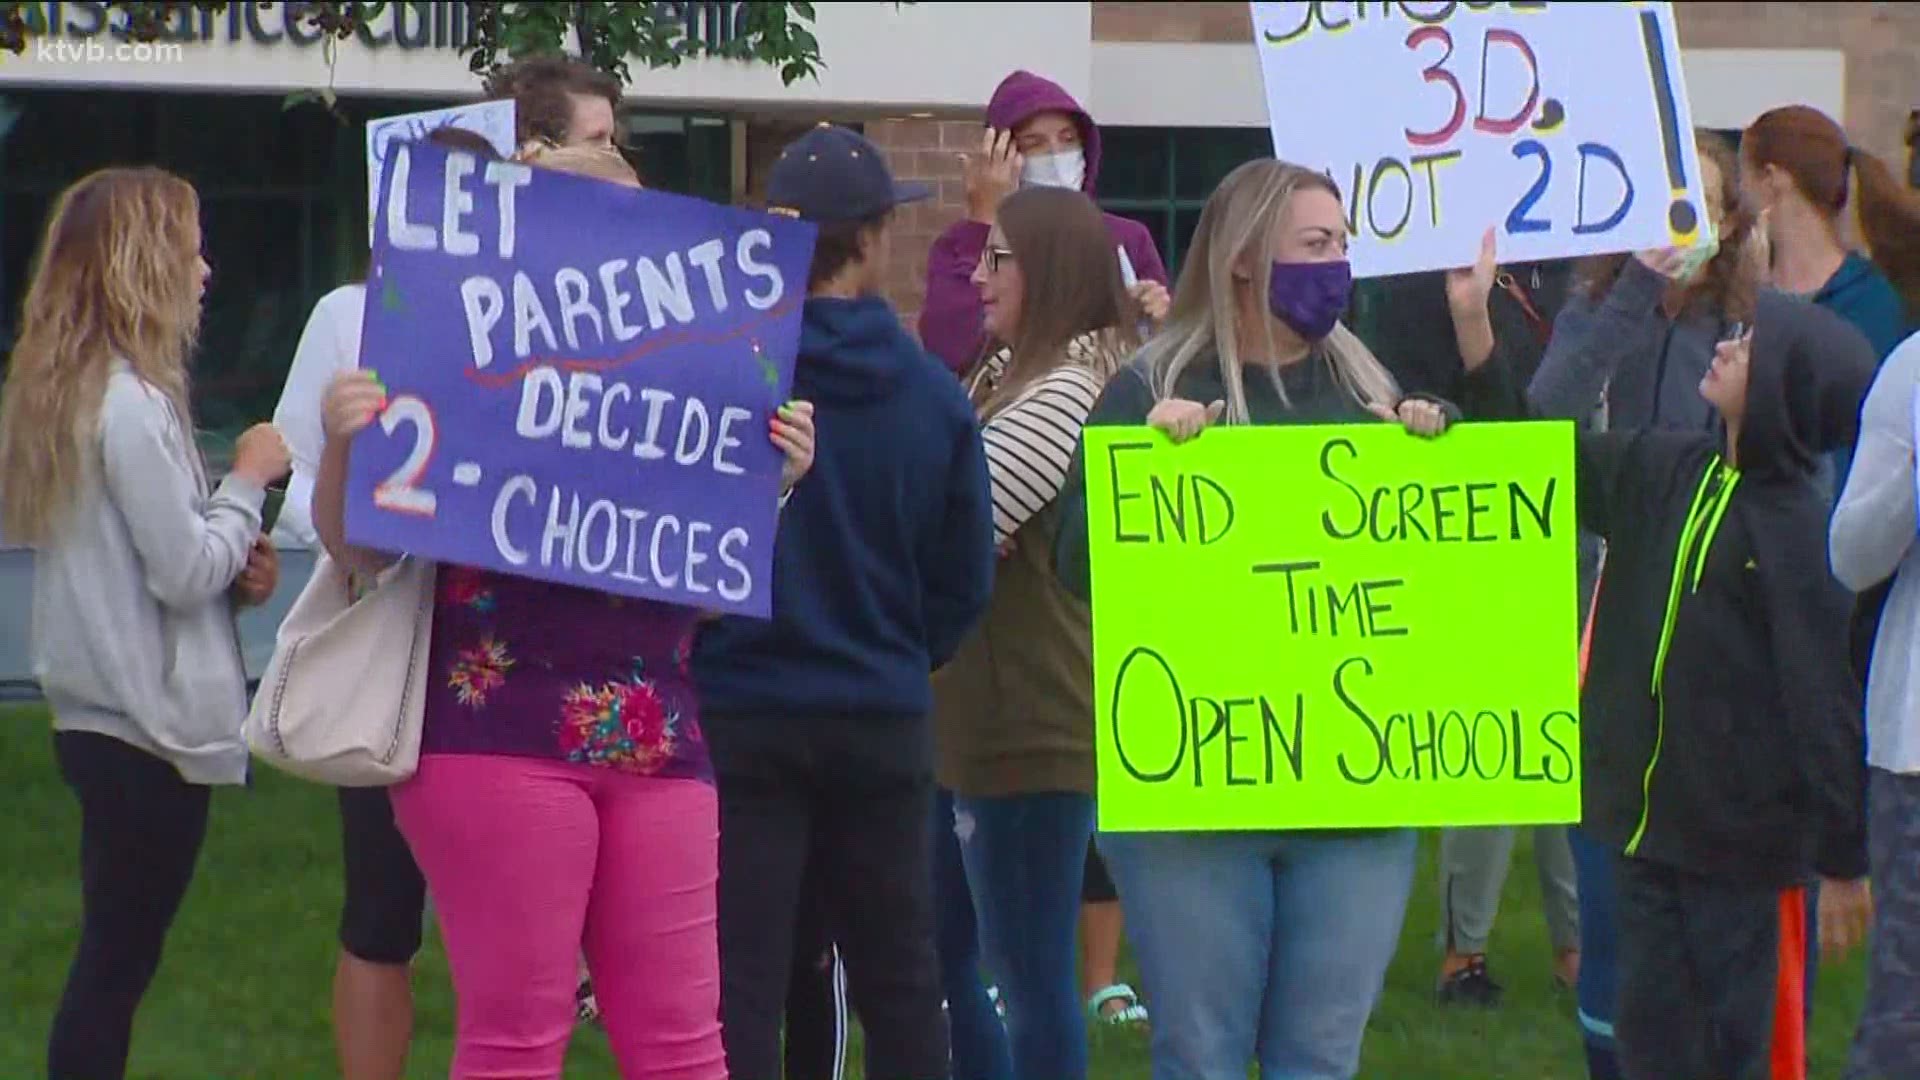 The protesters outside the West Ada district office said they are unhappy with the decision to start the school year with remote learning.